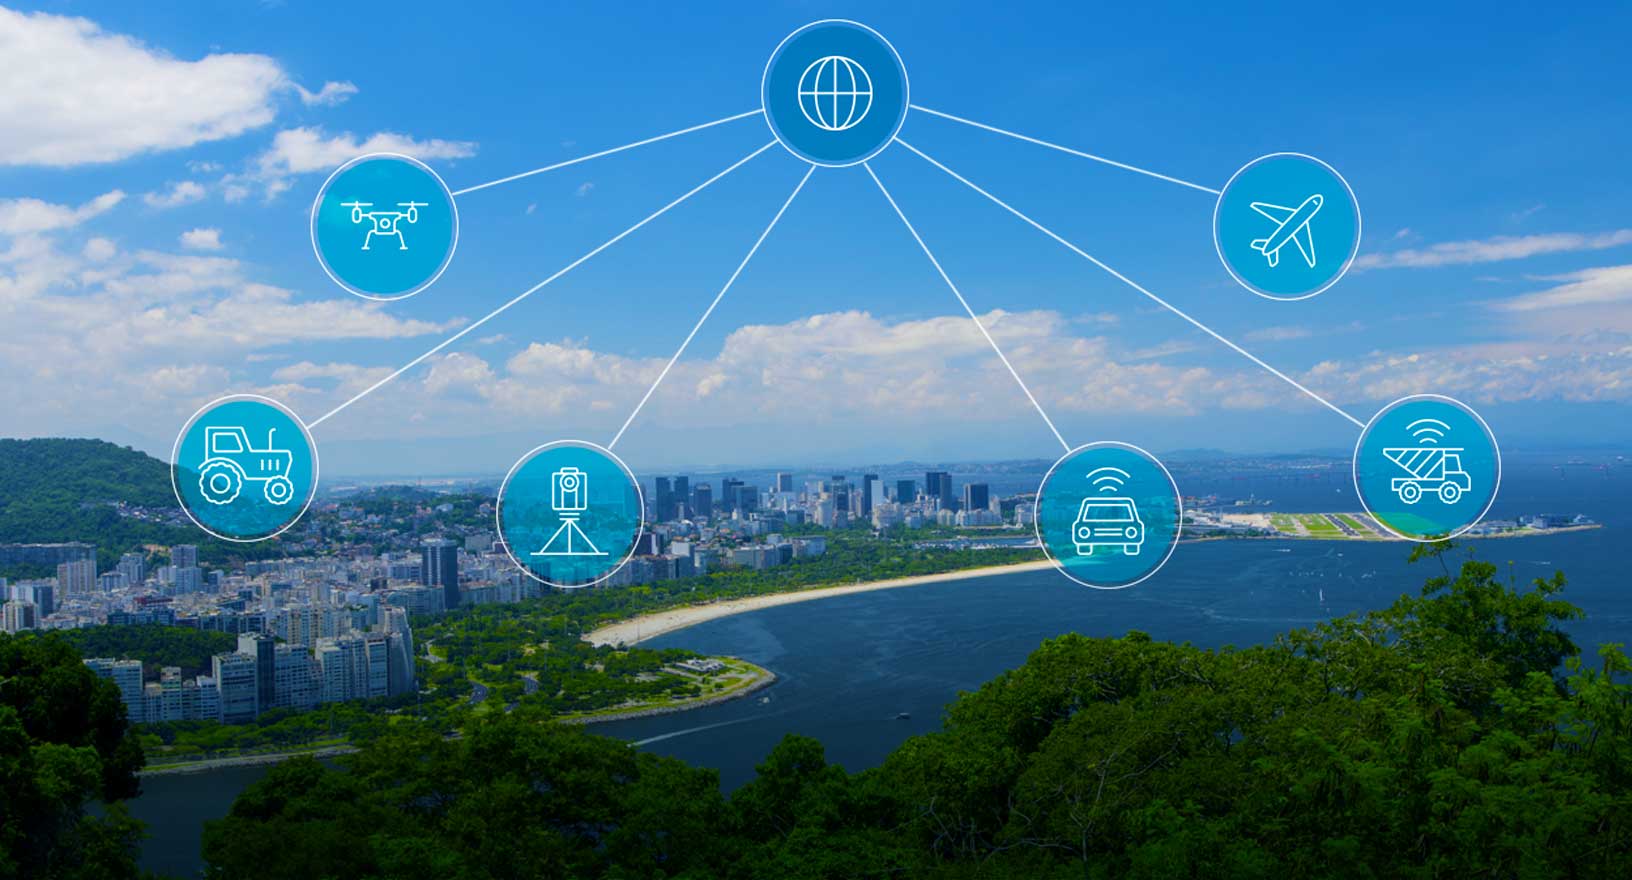 City, forest and water-front with blue sky with various application icons overlaid to depict that our TerraStar Correction Services are available for a variety of applications.  